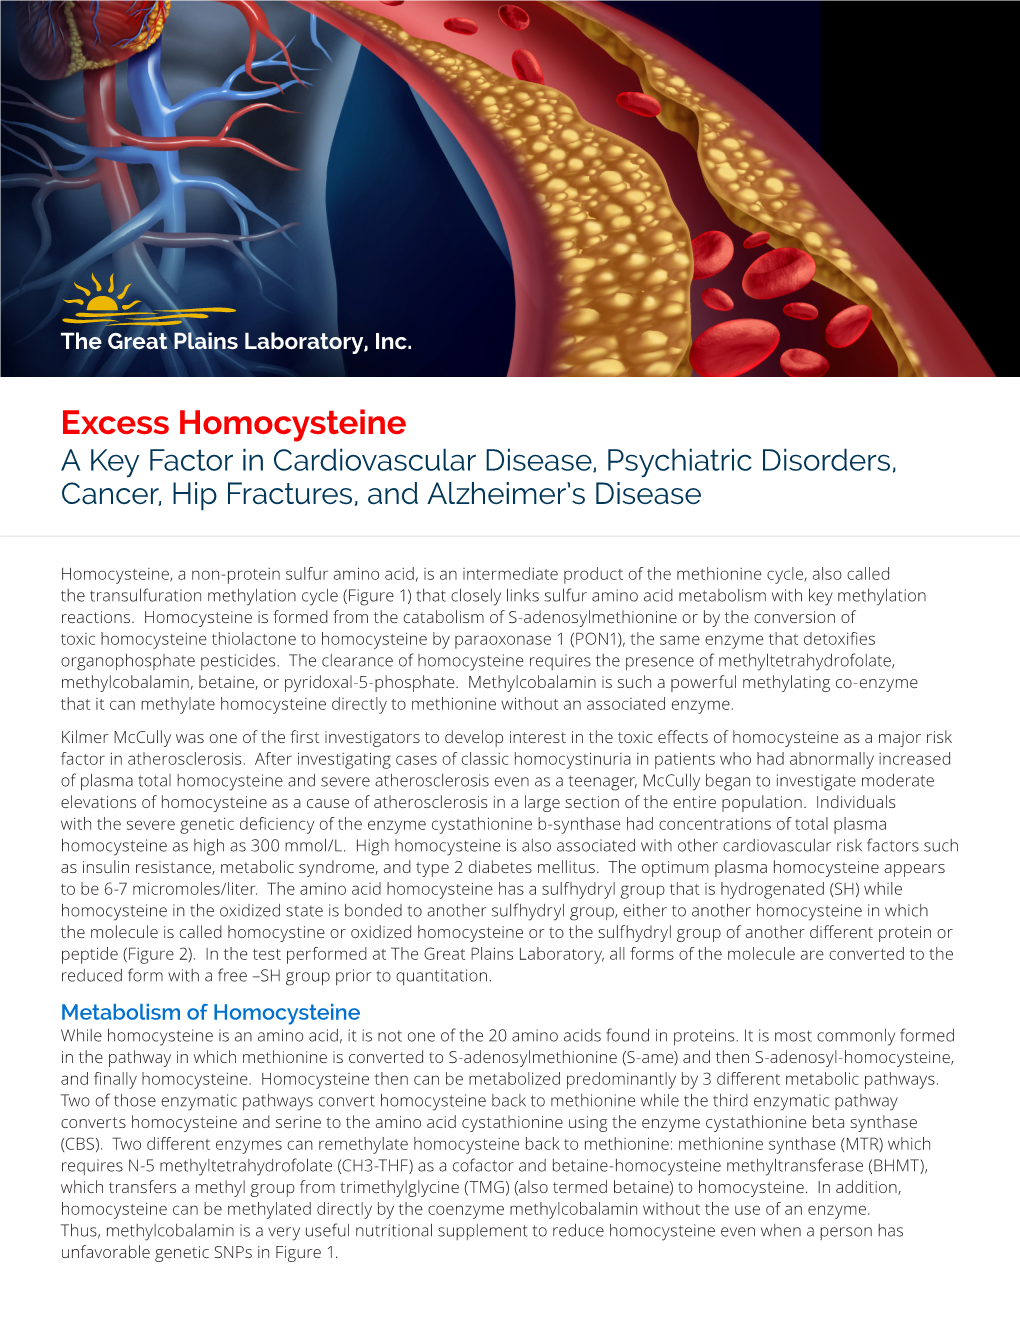 Excess Homocysteine a Key Factor in Cardiovascular Disease, Psychiatric Disorders, Cancer, Hip Fractures, and Alzheimer’S Disease